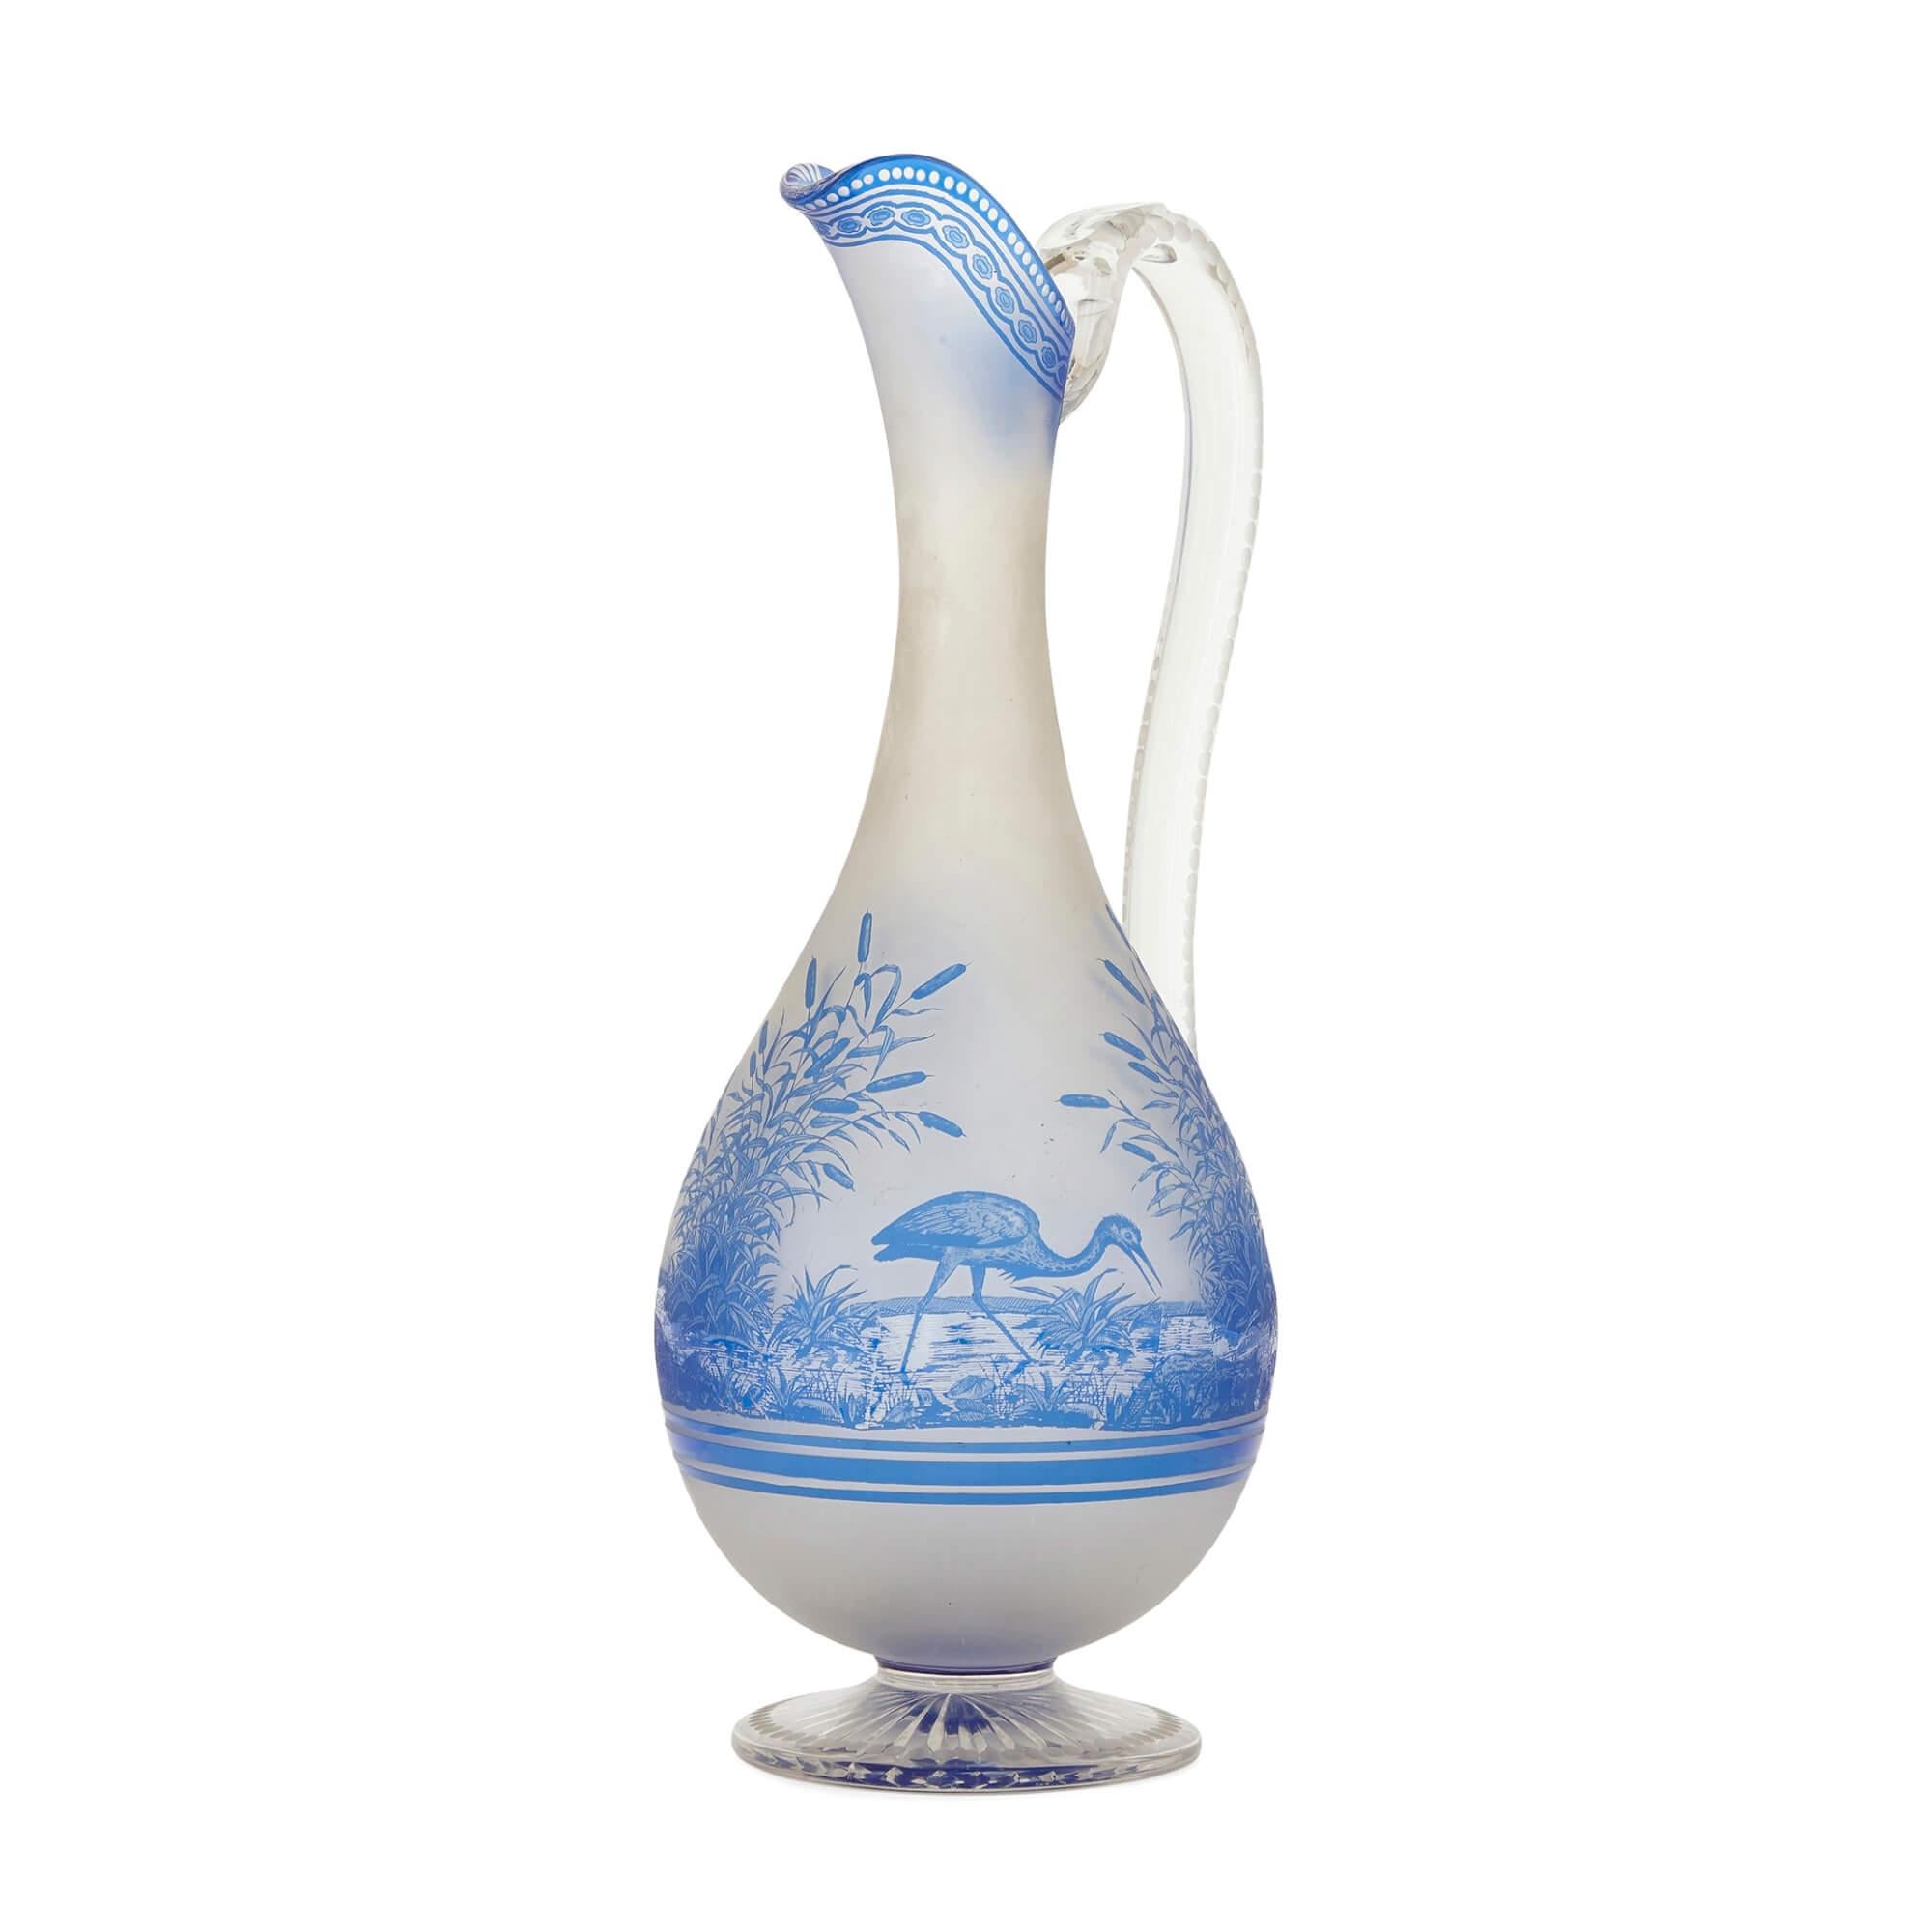 Blue and opaque etched glass ewer by Baccarat
French, 19th Century
Measures: Height 32cm, width 13cm, depth 12cm

This beautiful Baccarat glass ewer features a bulbous body with a long, slender neck terminating in a shaped mouth. The frosted